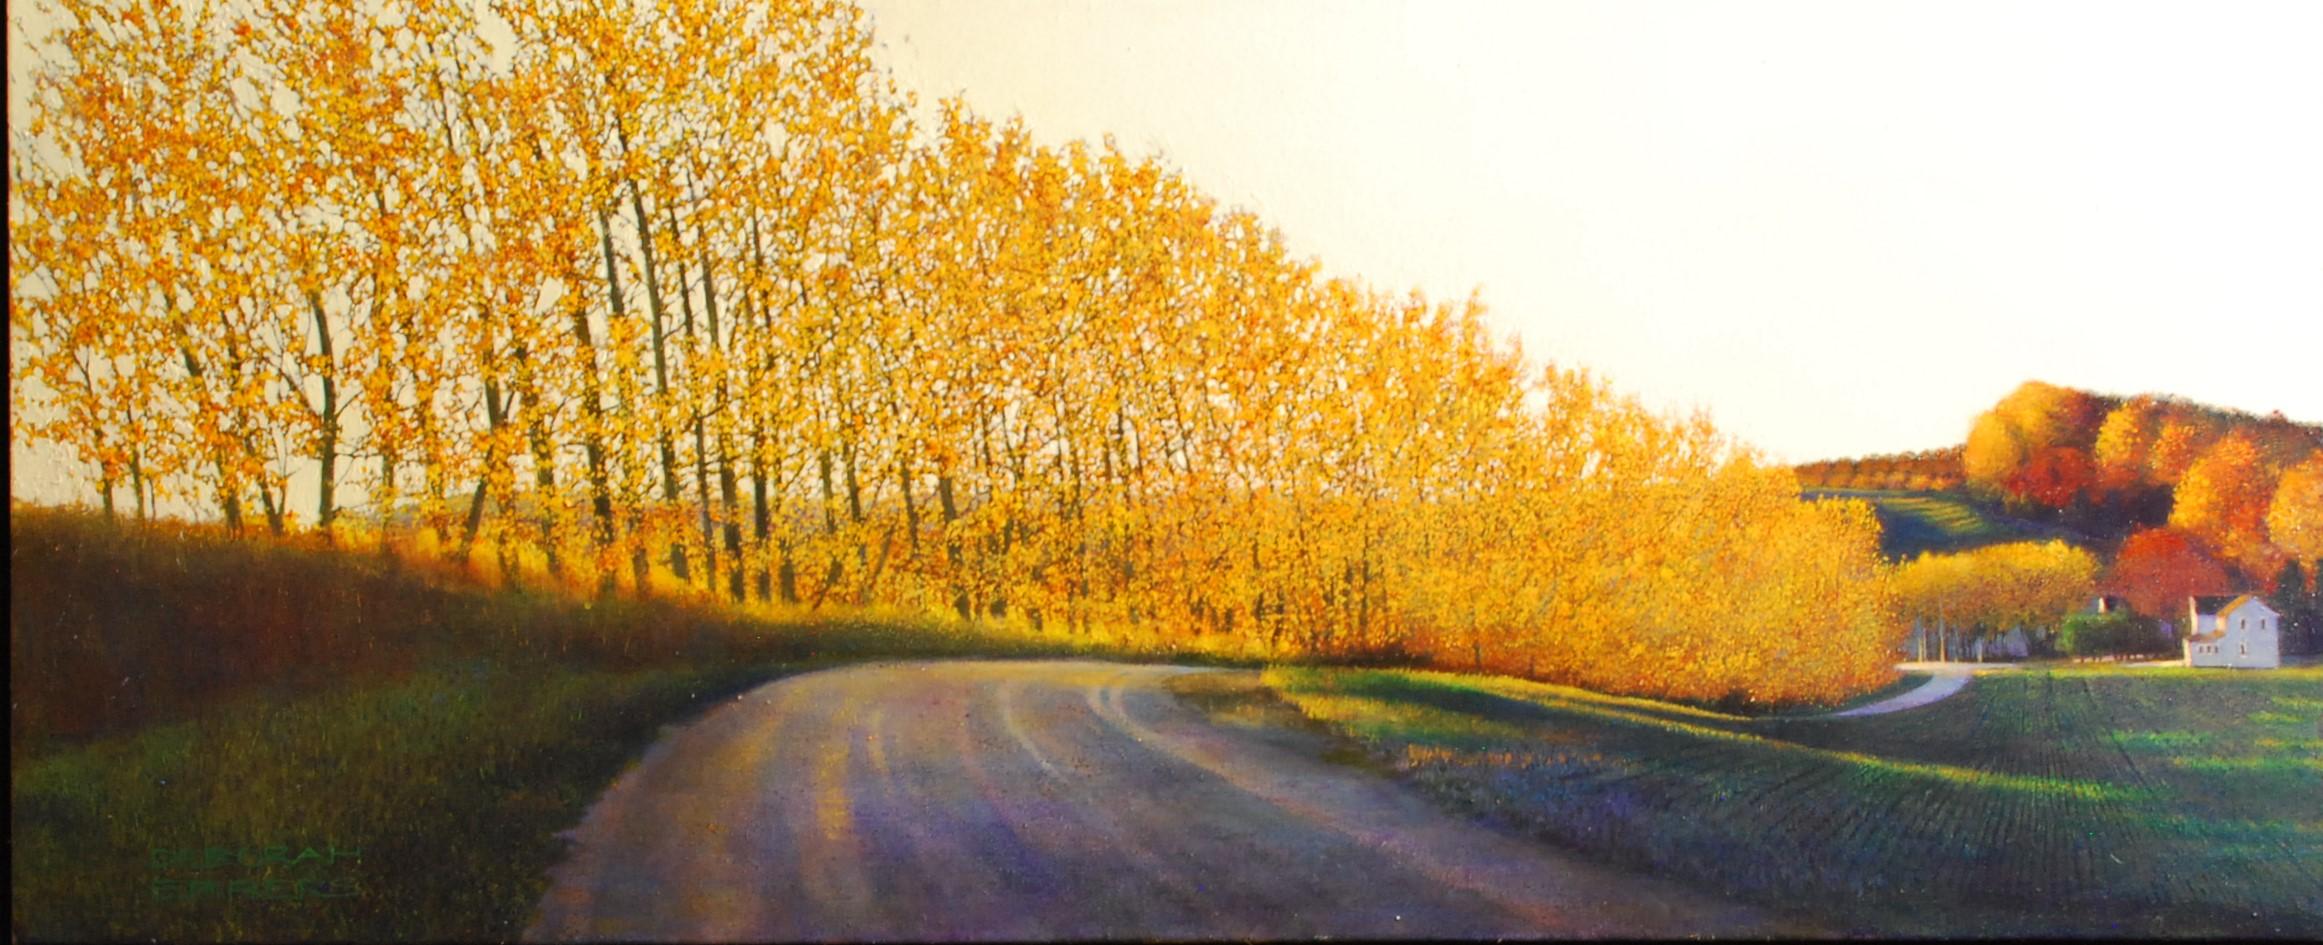 Deborah Ebbers Landscape Painting - The Color of Home, Original Oil Painting, Glowing Autumn Foliage on Country Road